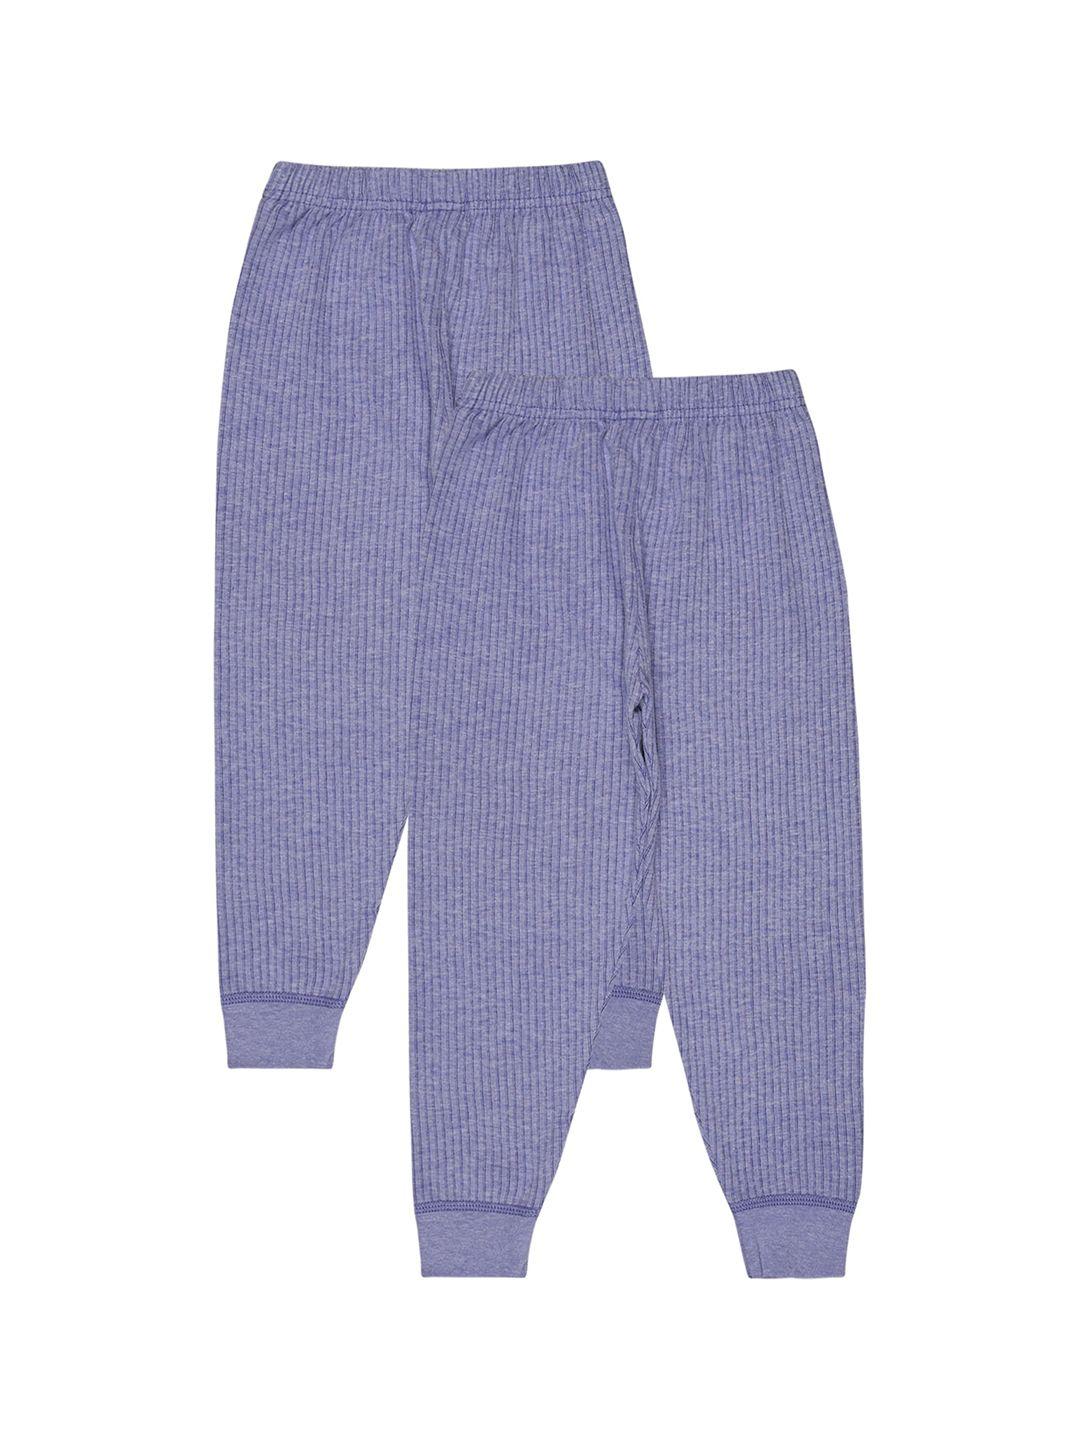 bodycare insider infants pack of 2 ribbed thermal bottoms